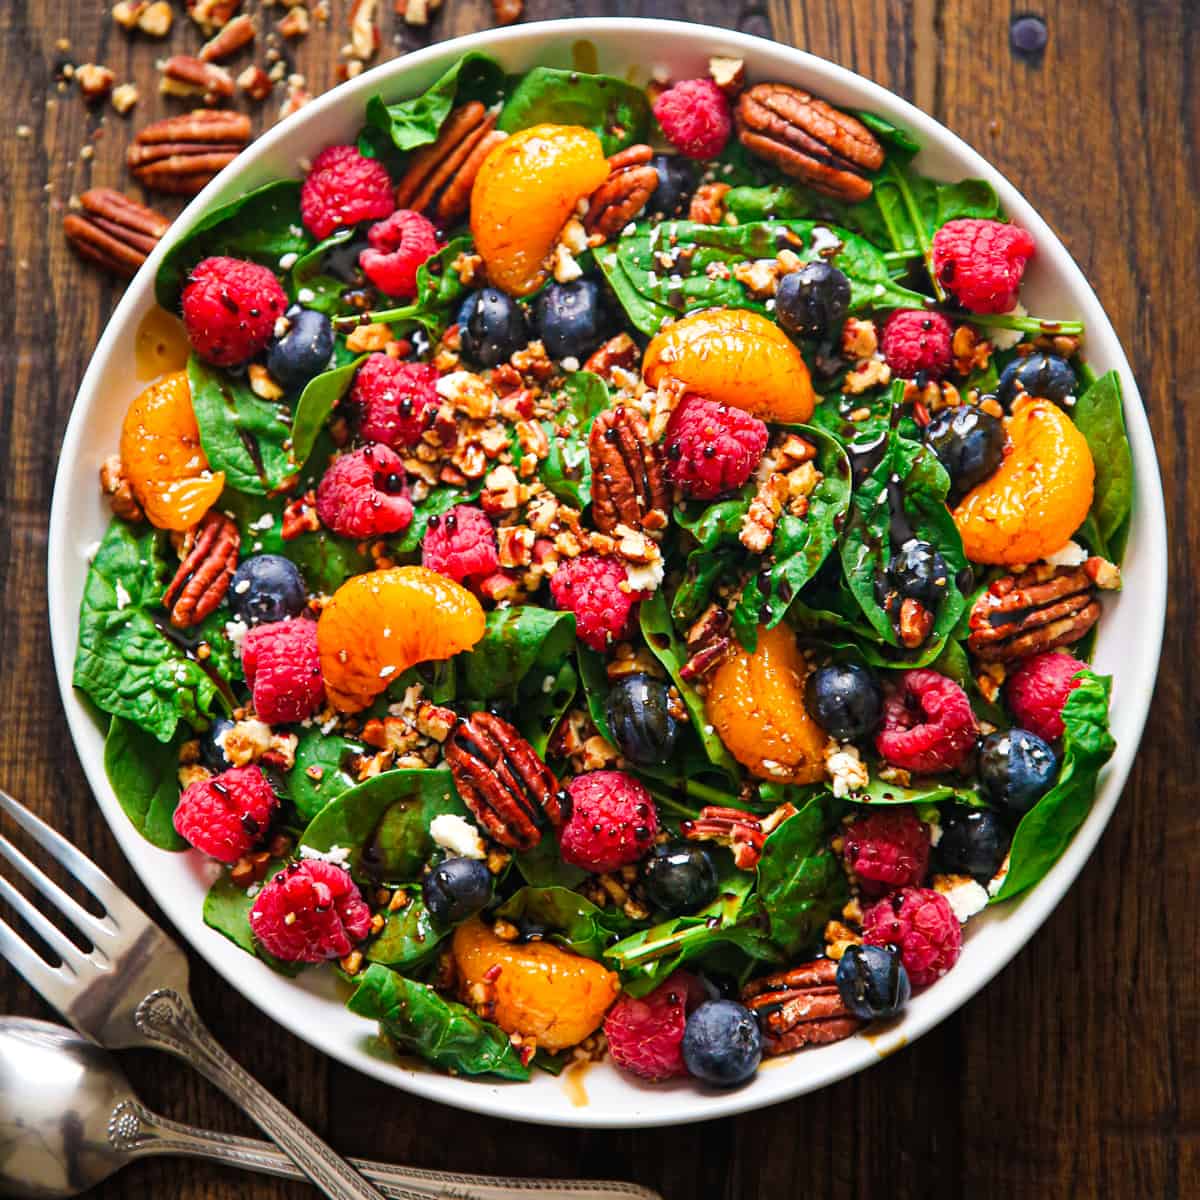 Berry Spinach Salad with Blueberries and Raspberries - Julia's Album